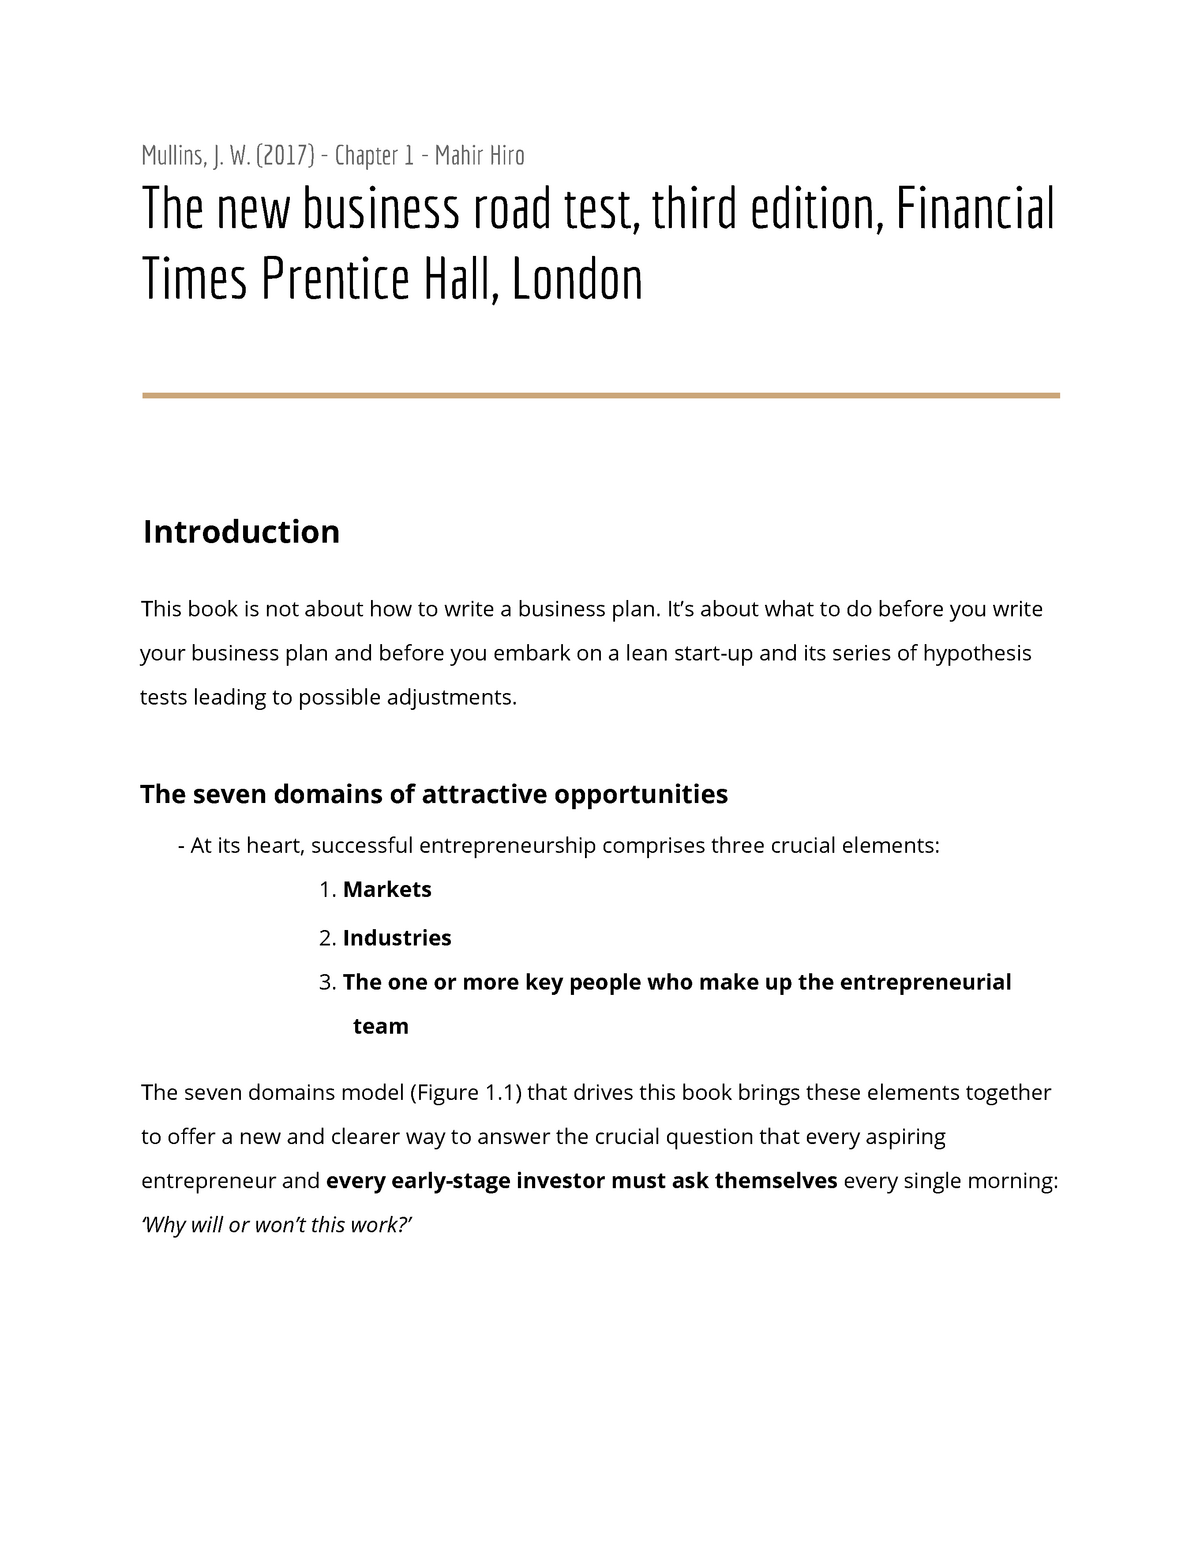 The new business road test summary - Mullins, J. W. (2017